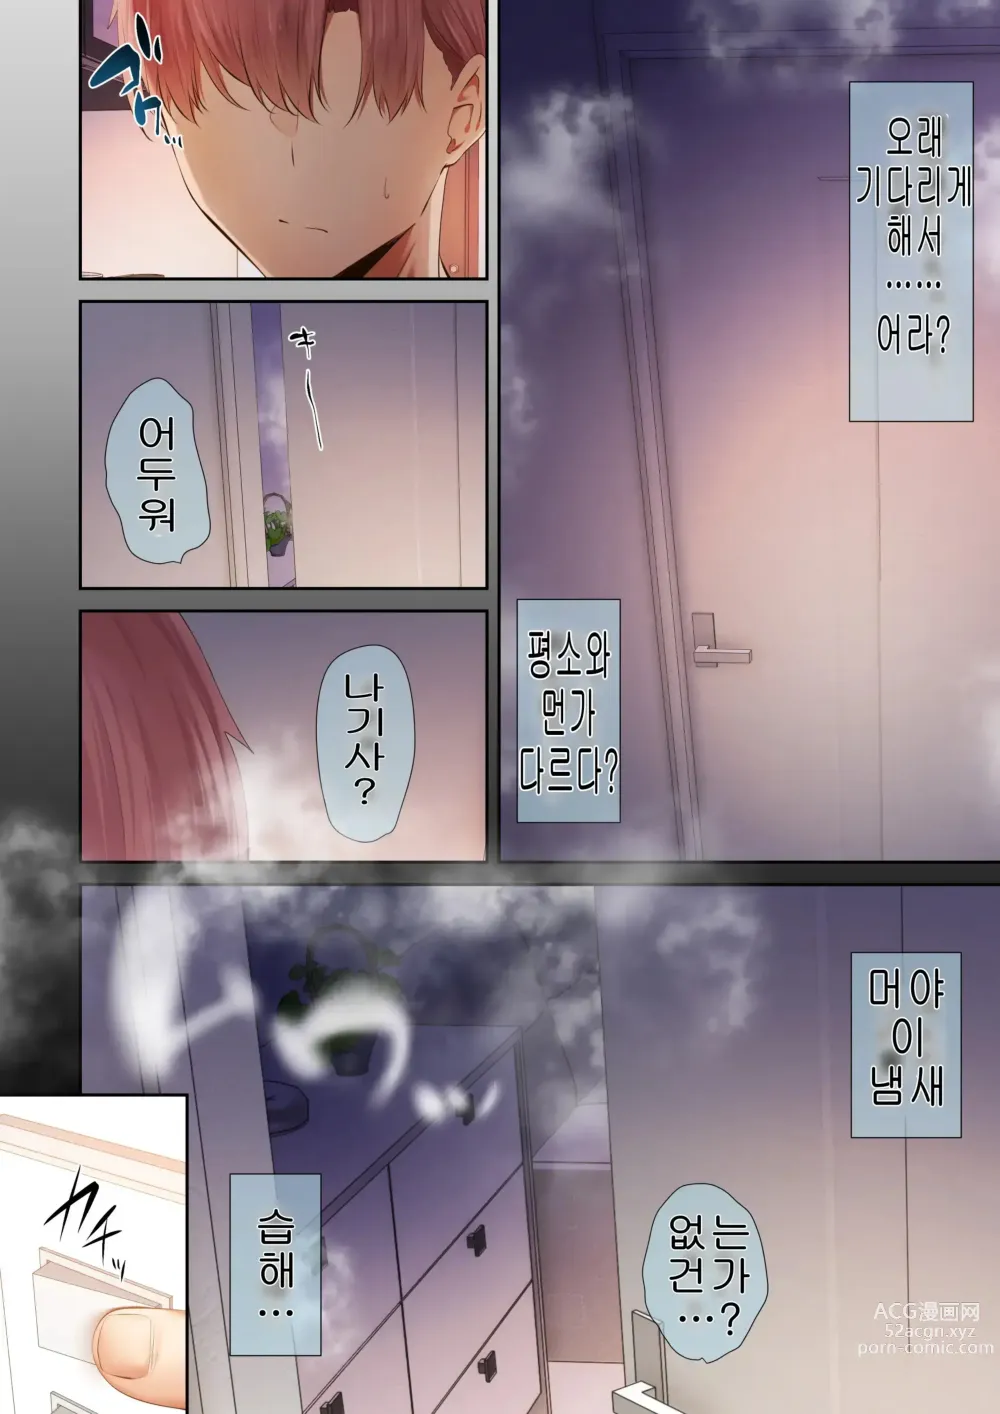 Page 94 of doujinshi A story about my favorite senior, who can be trusted, is made into a female by Yarichin. 의지할수 있는 선배가 야한친구에 의해 암컷이된 이야기